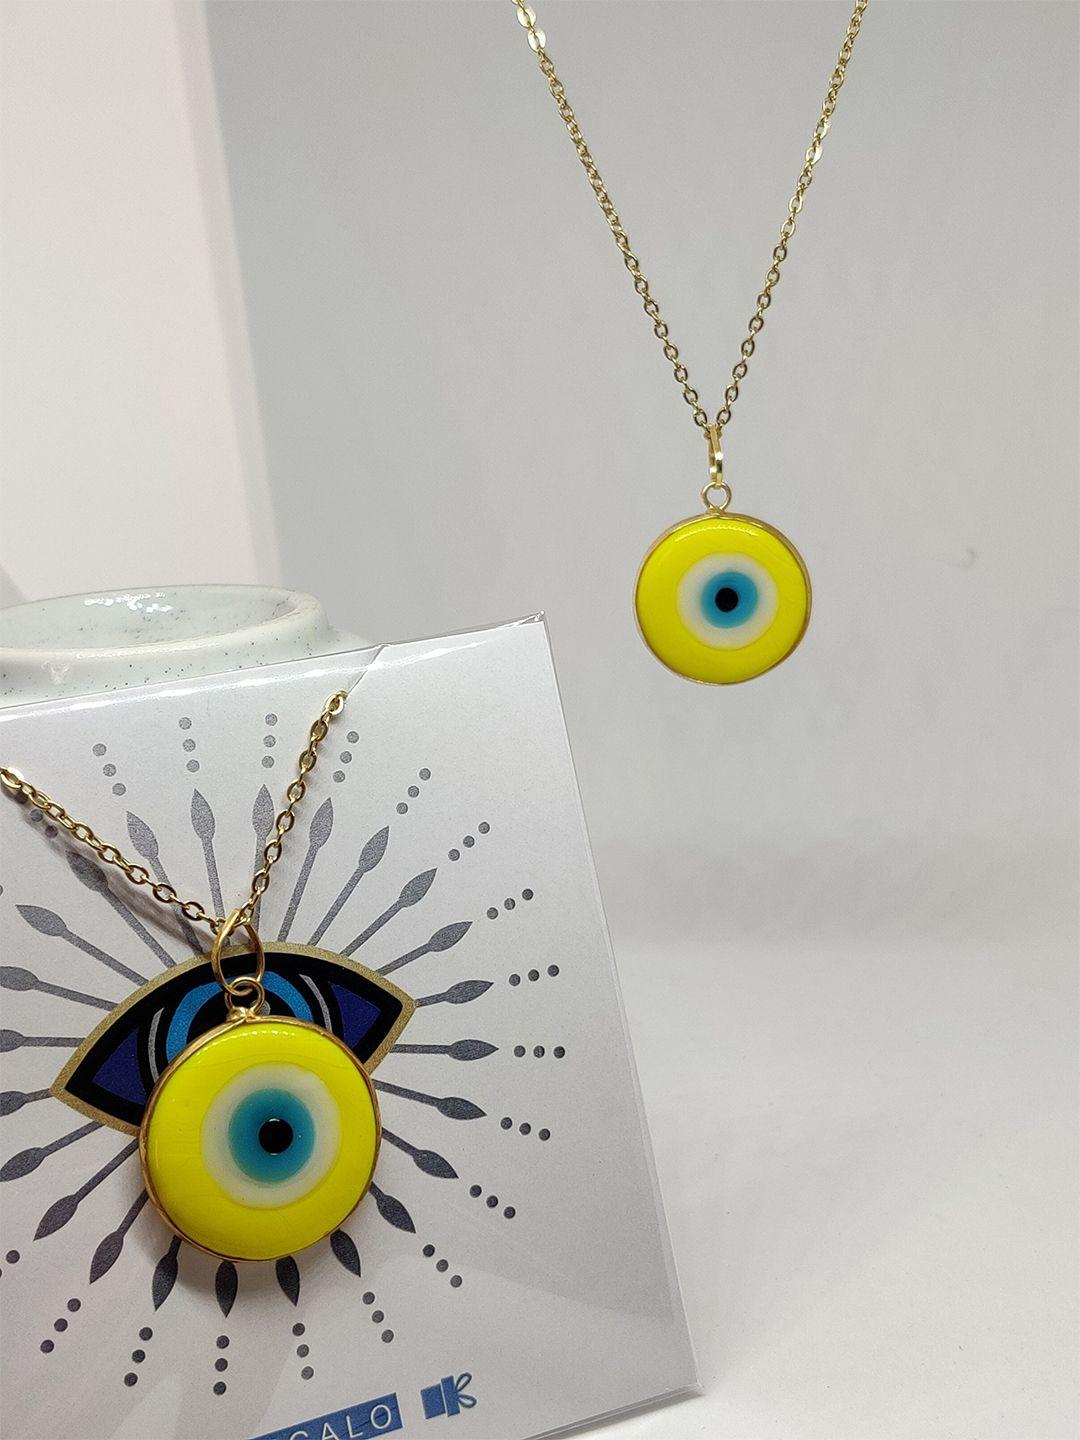 el regalo yellow & gold-toned evil eye tribal necklace